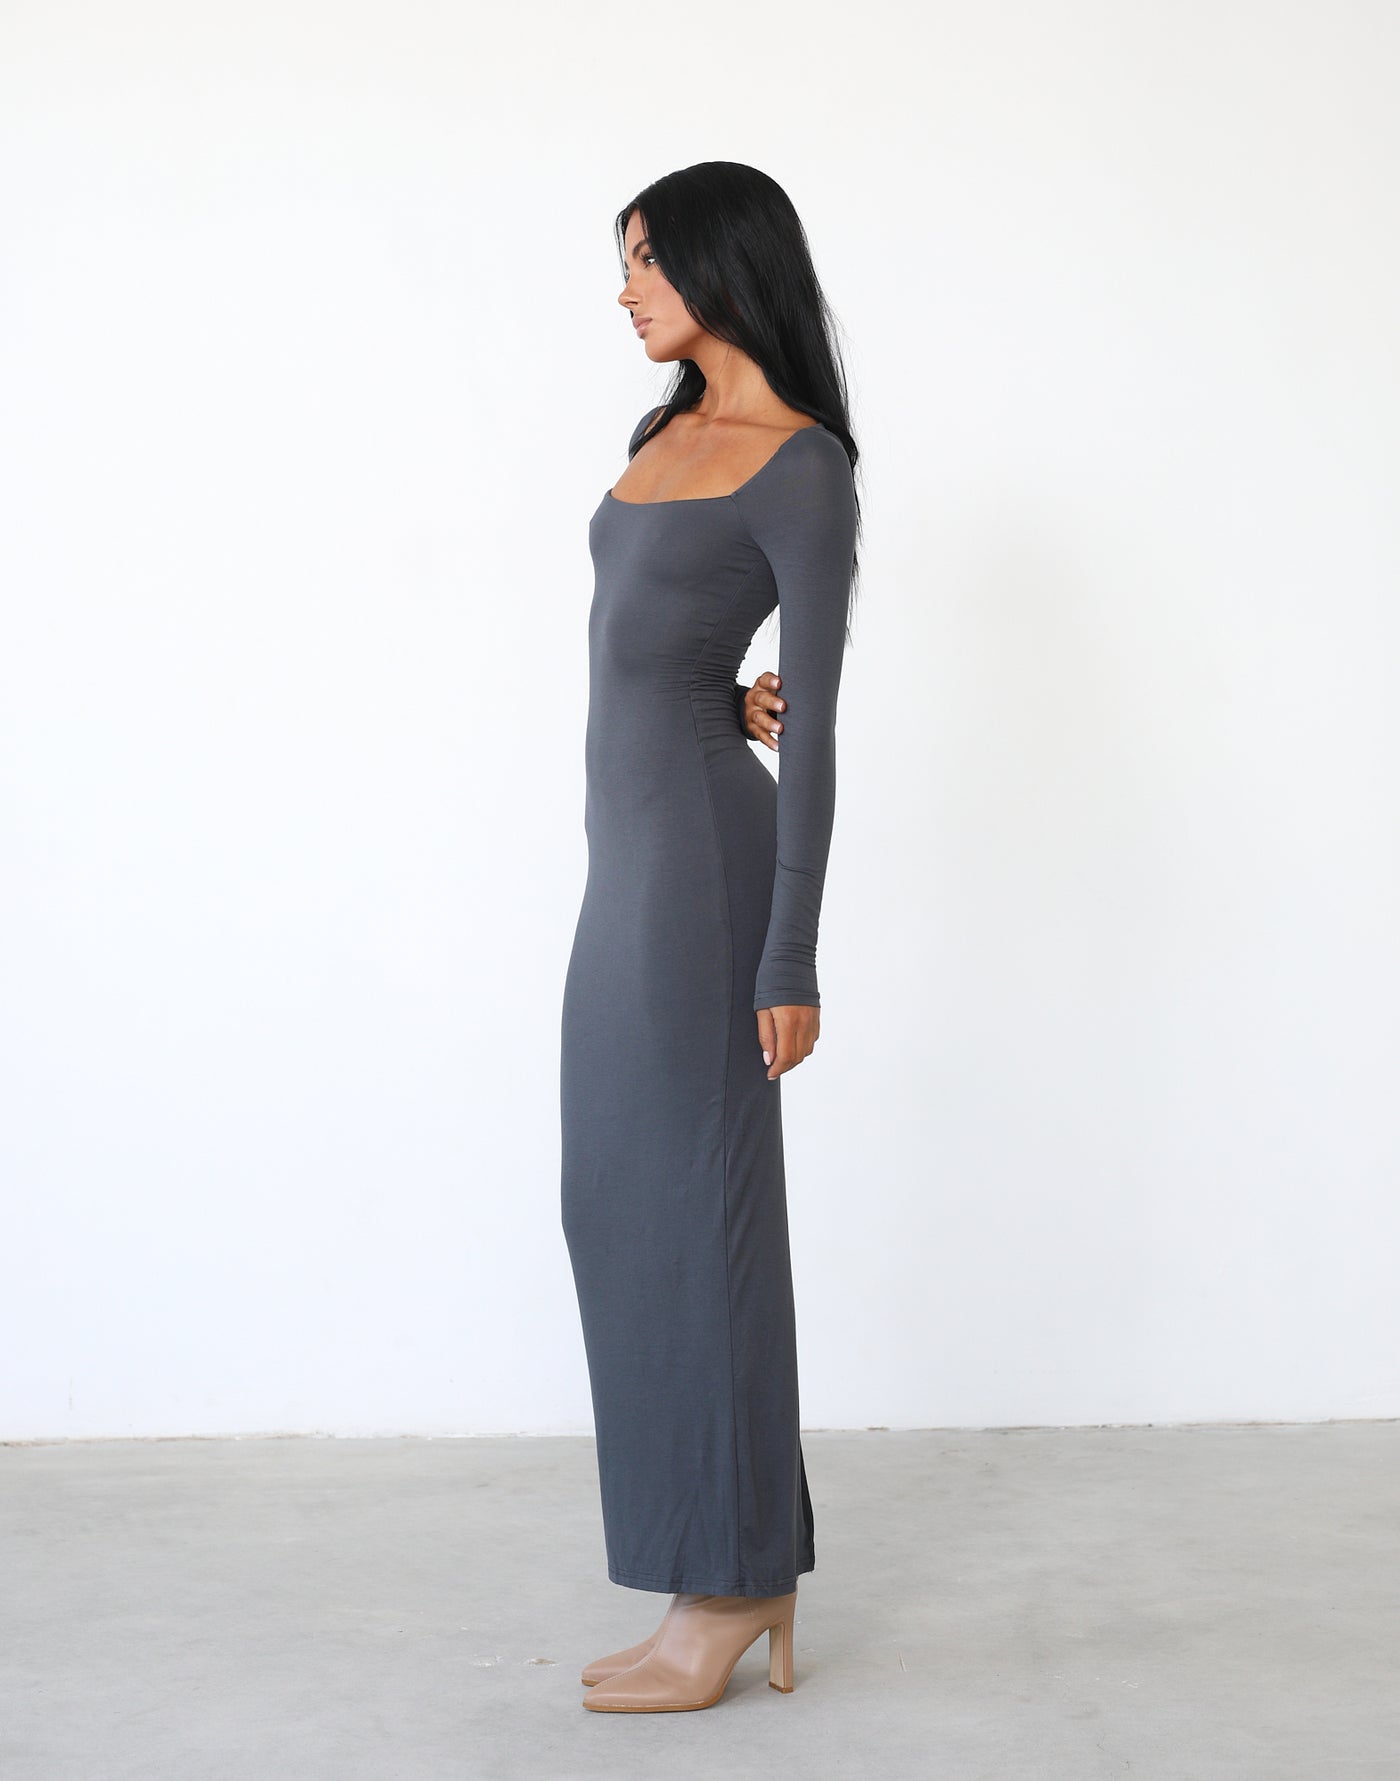 Eyes On Me Maxi Dress (Charcoal) - Long Sleeved Fitted Square Neck Maxi - Women's Dress - Charcoal Clothing